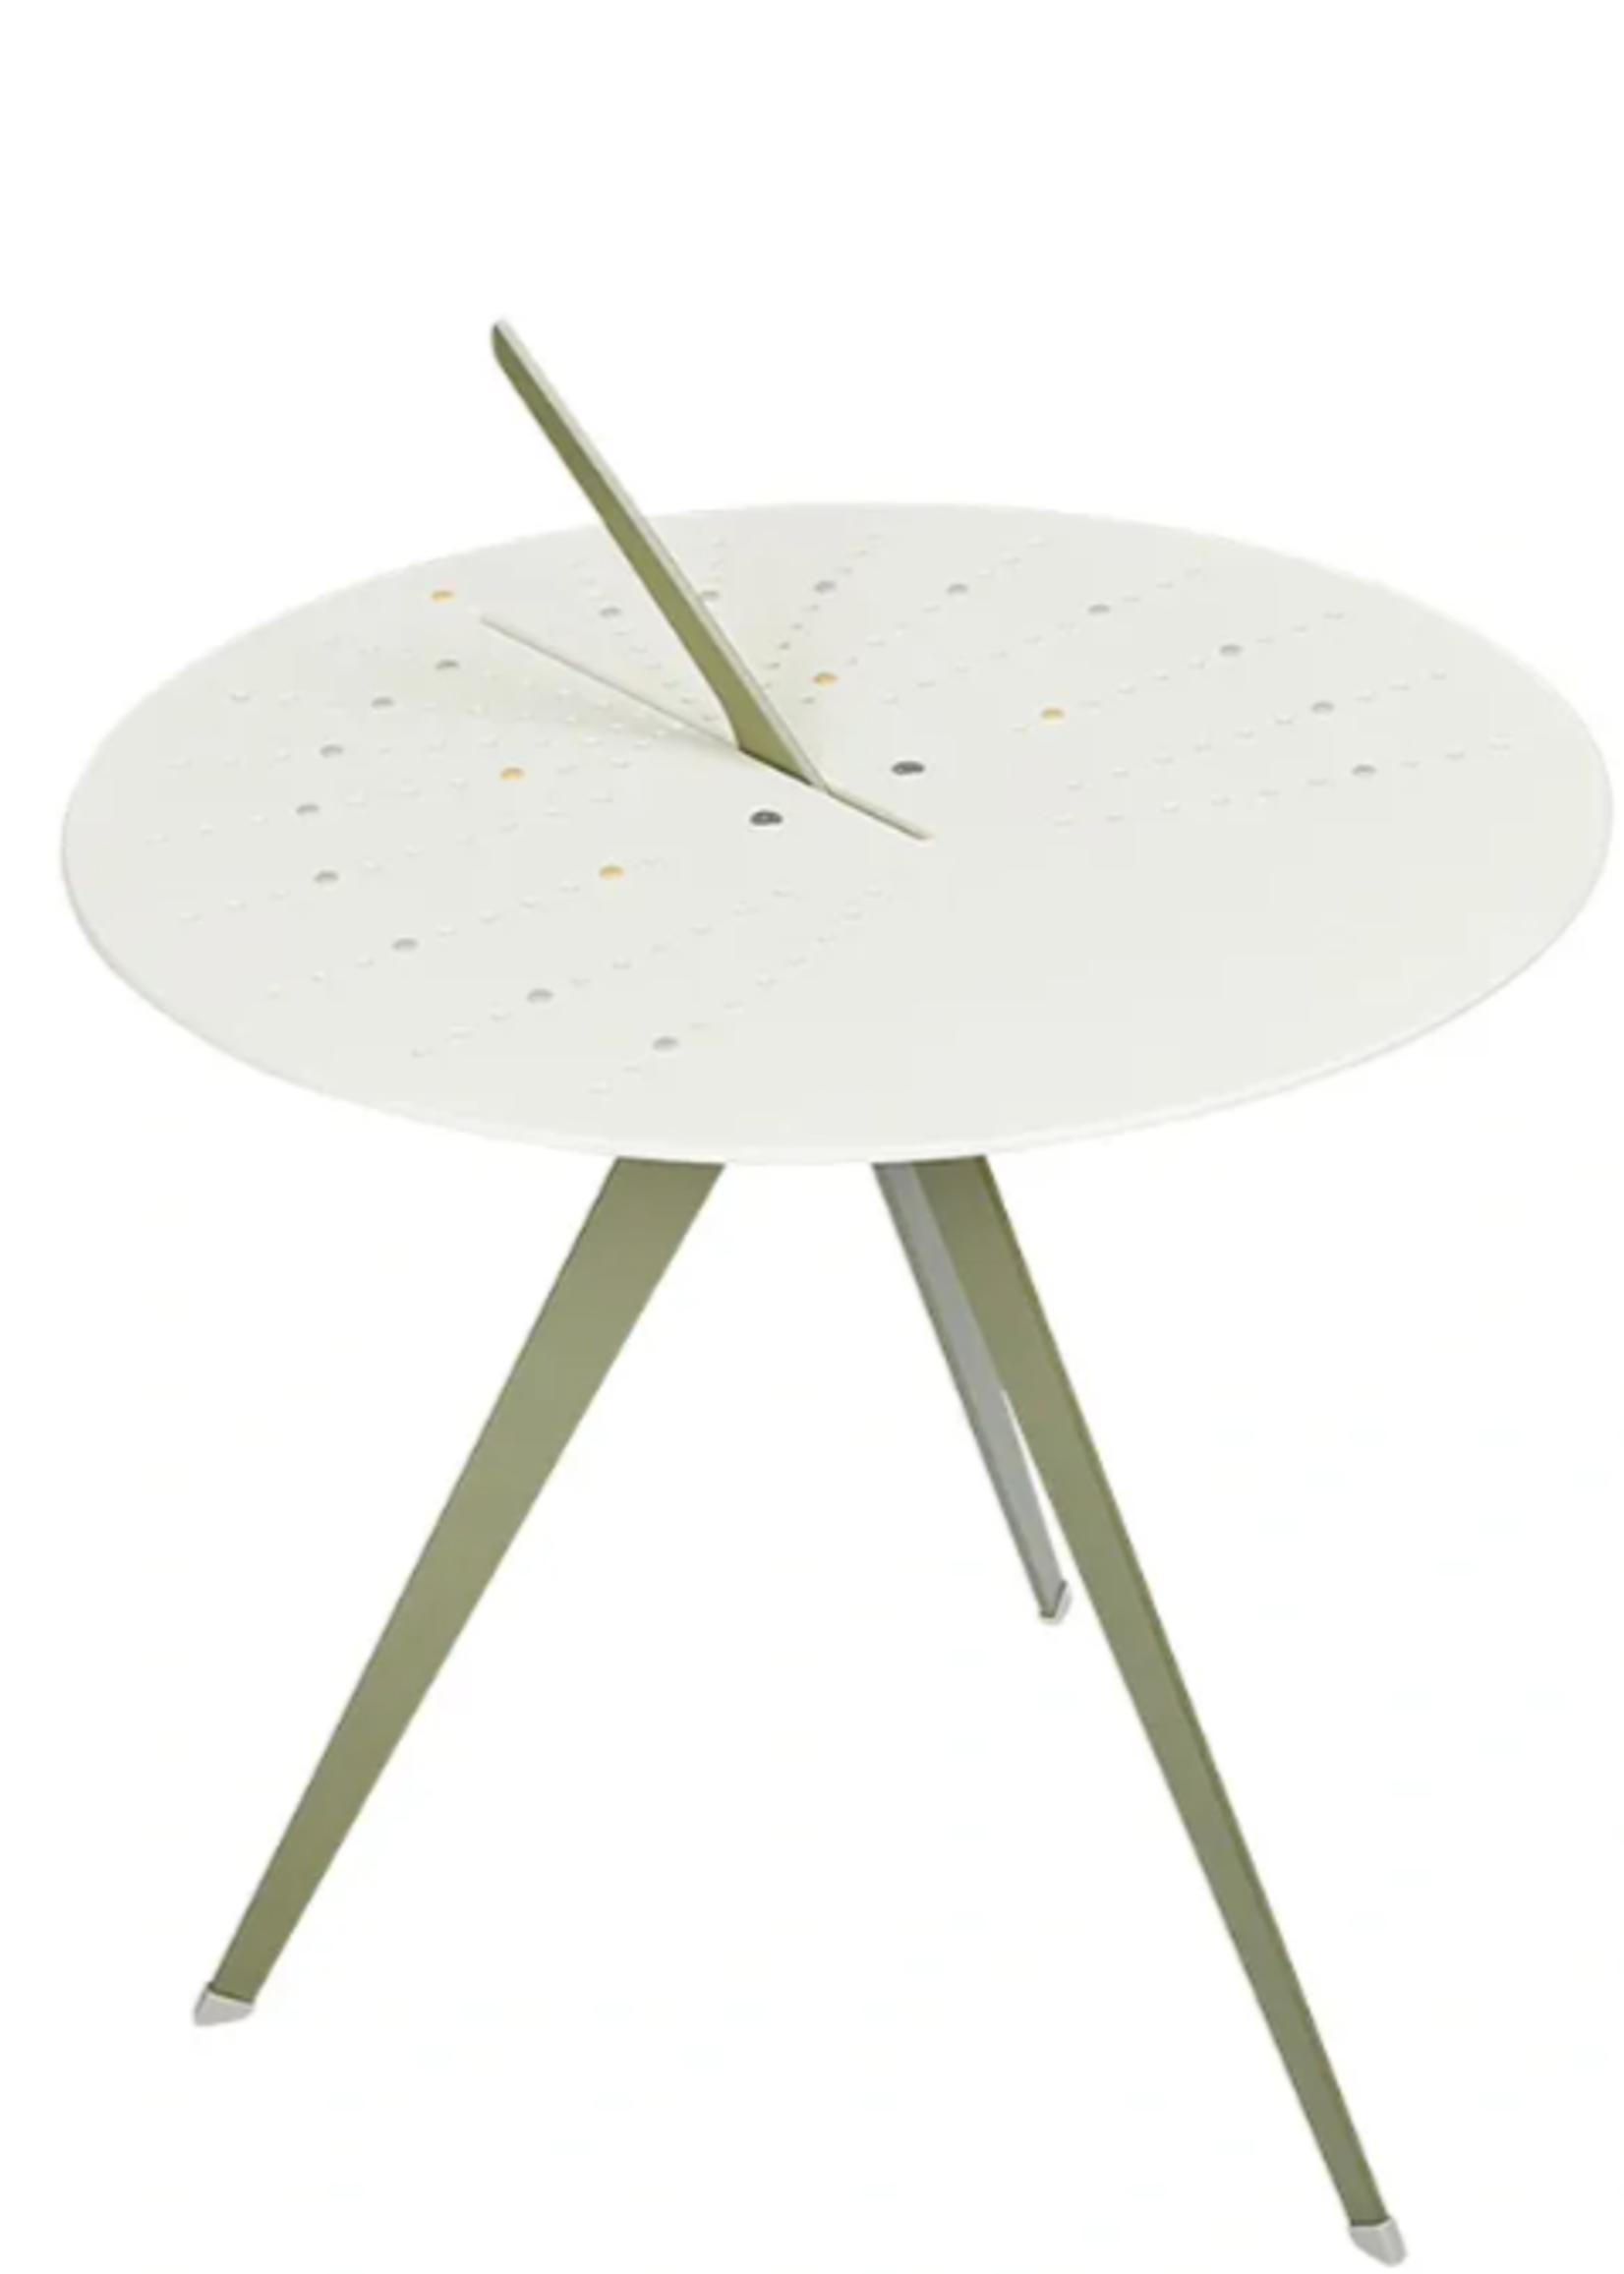 Weltevree Weltevree - Sundial Table - Cadran solaire et table d'appoint - Reed green